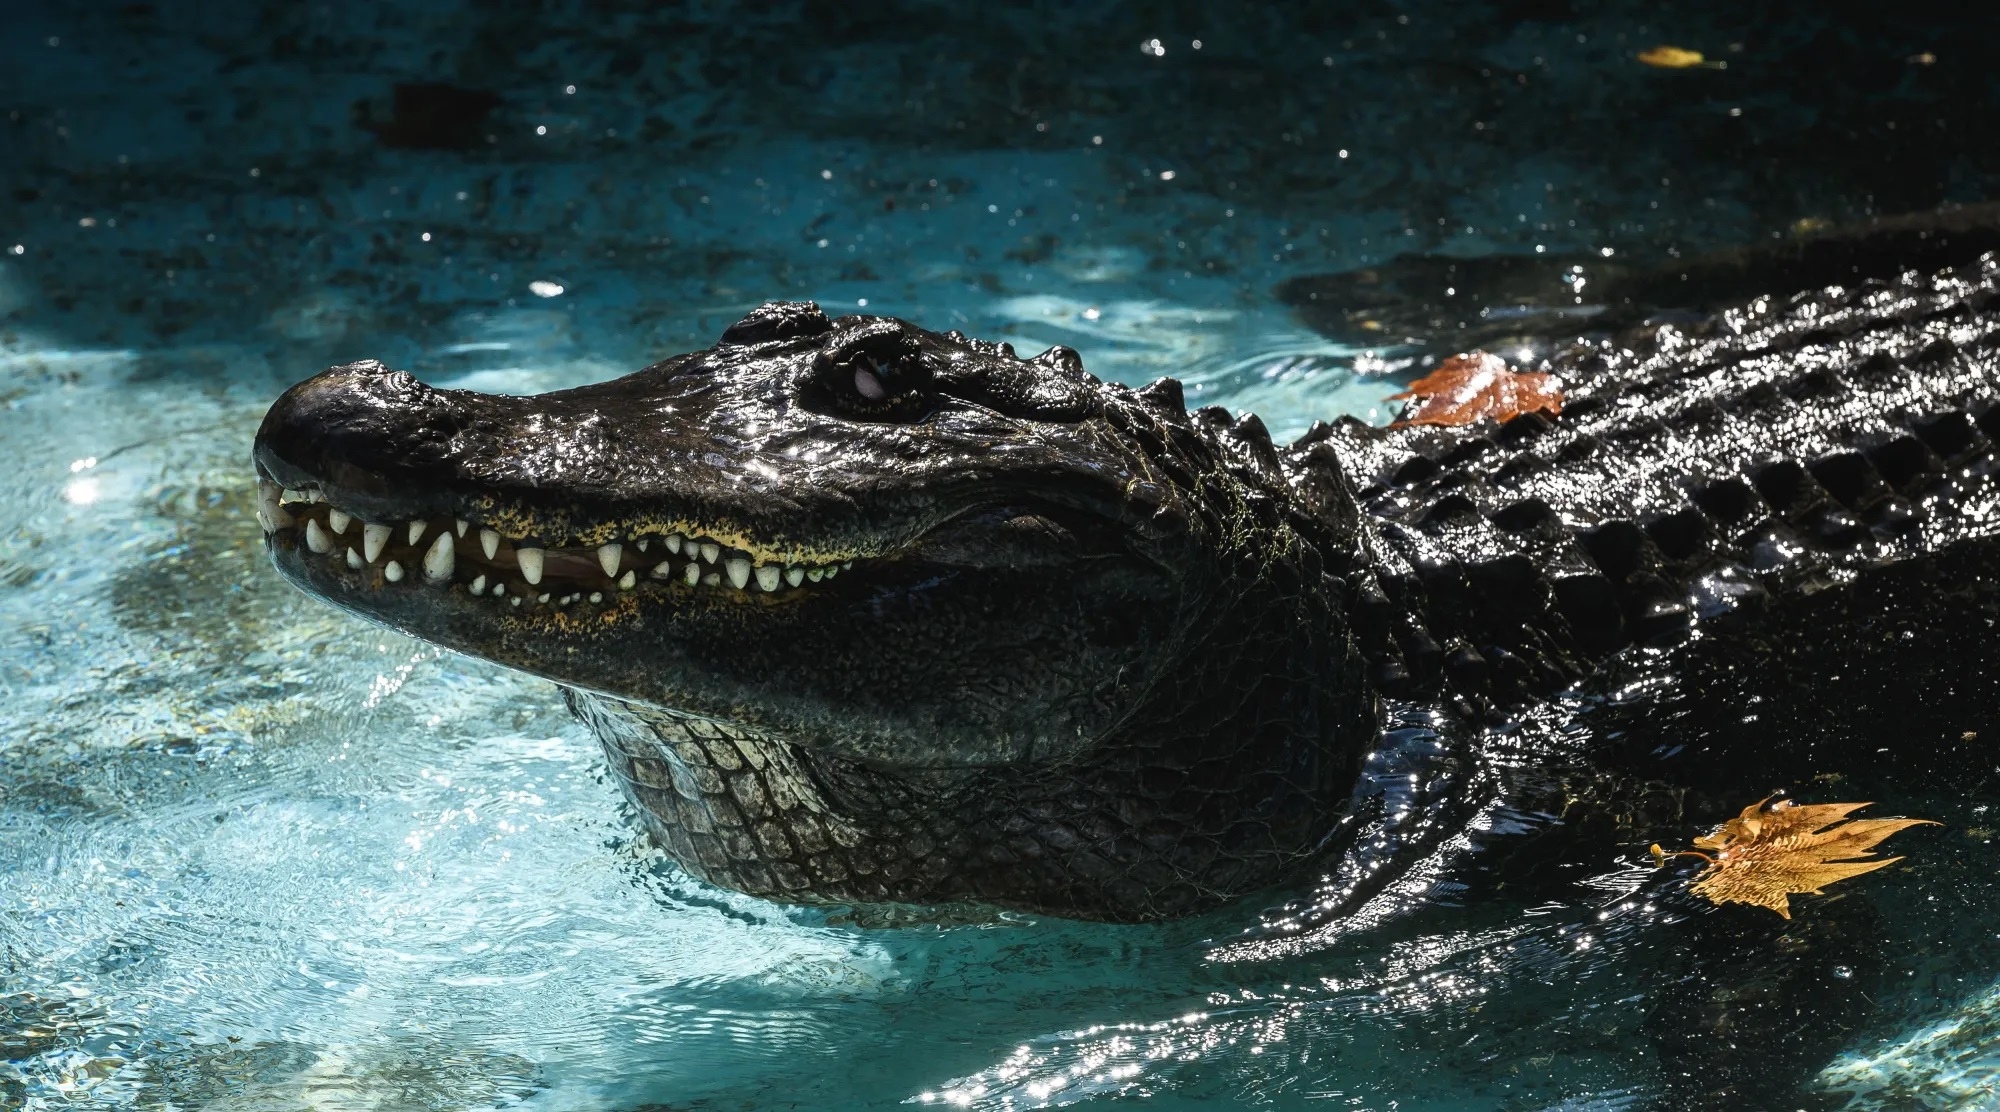 Young man arrested for jumping into Florida zoo alligator pond to record video